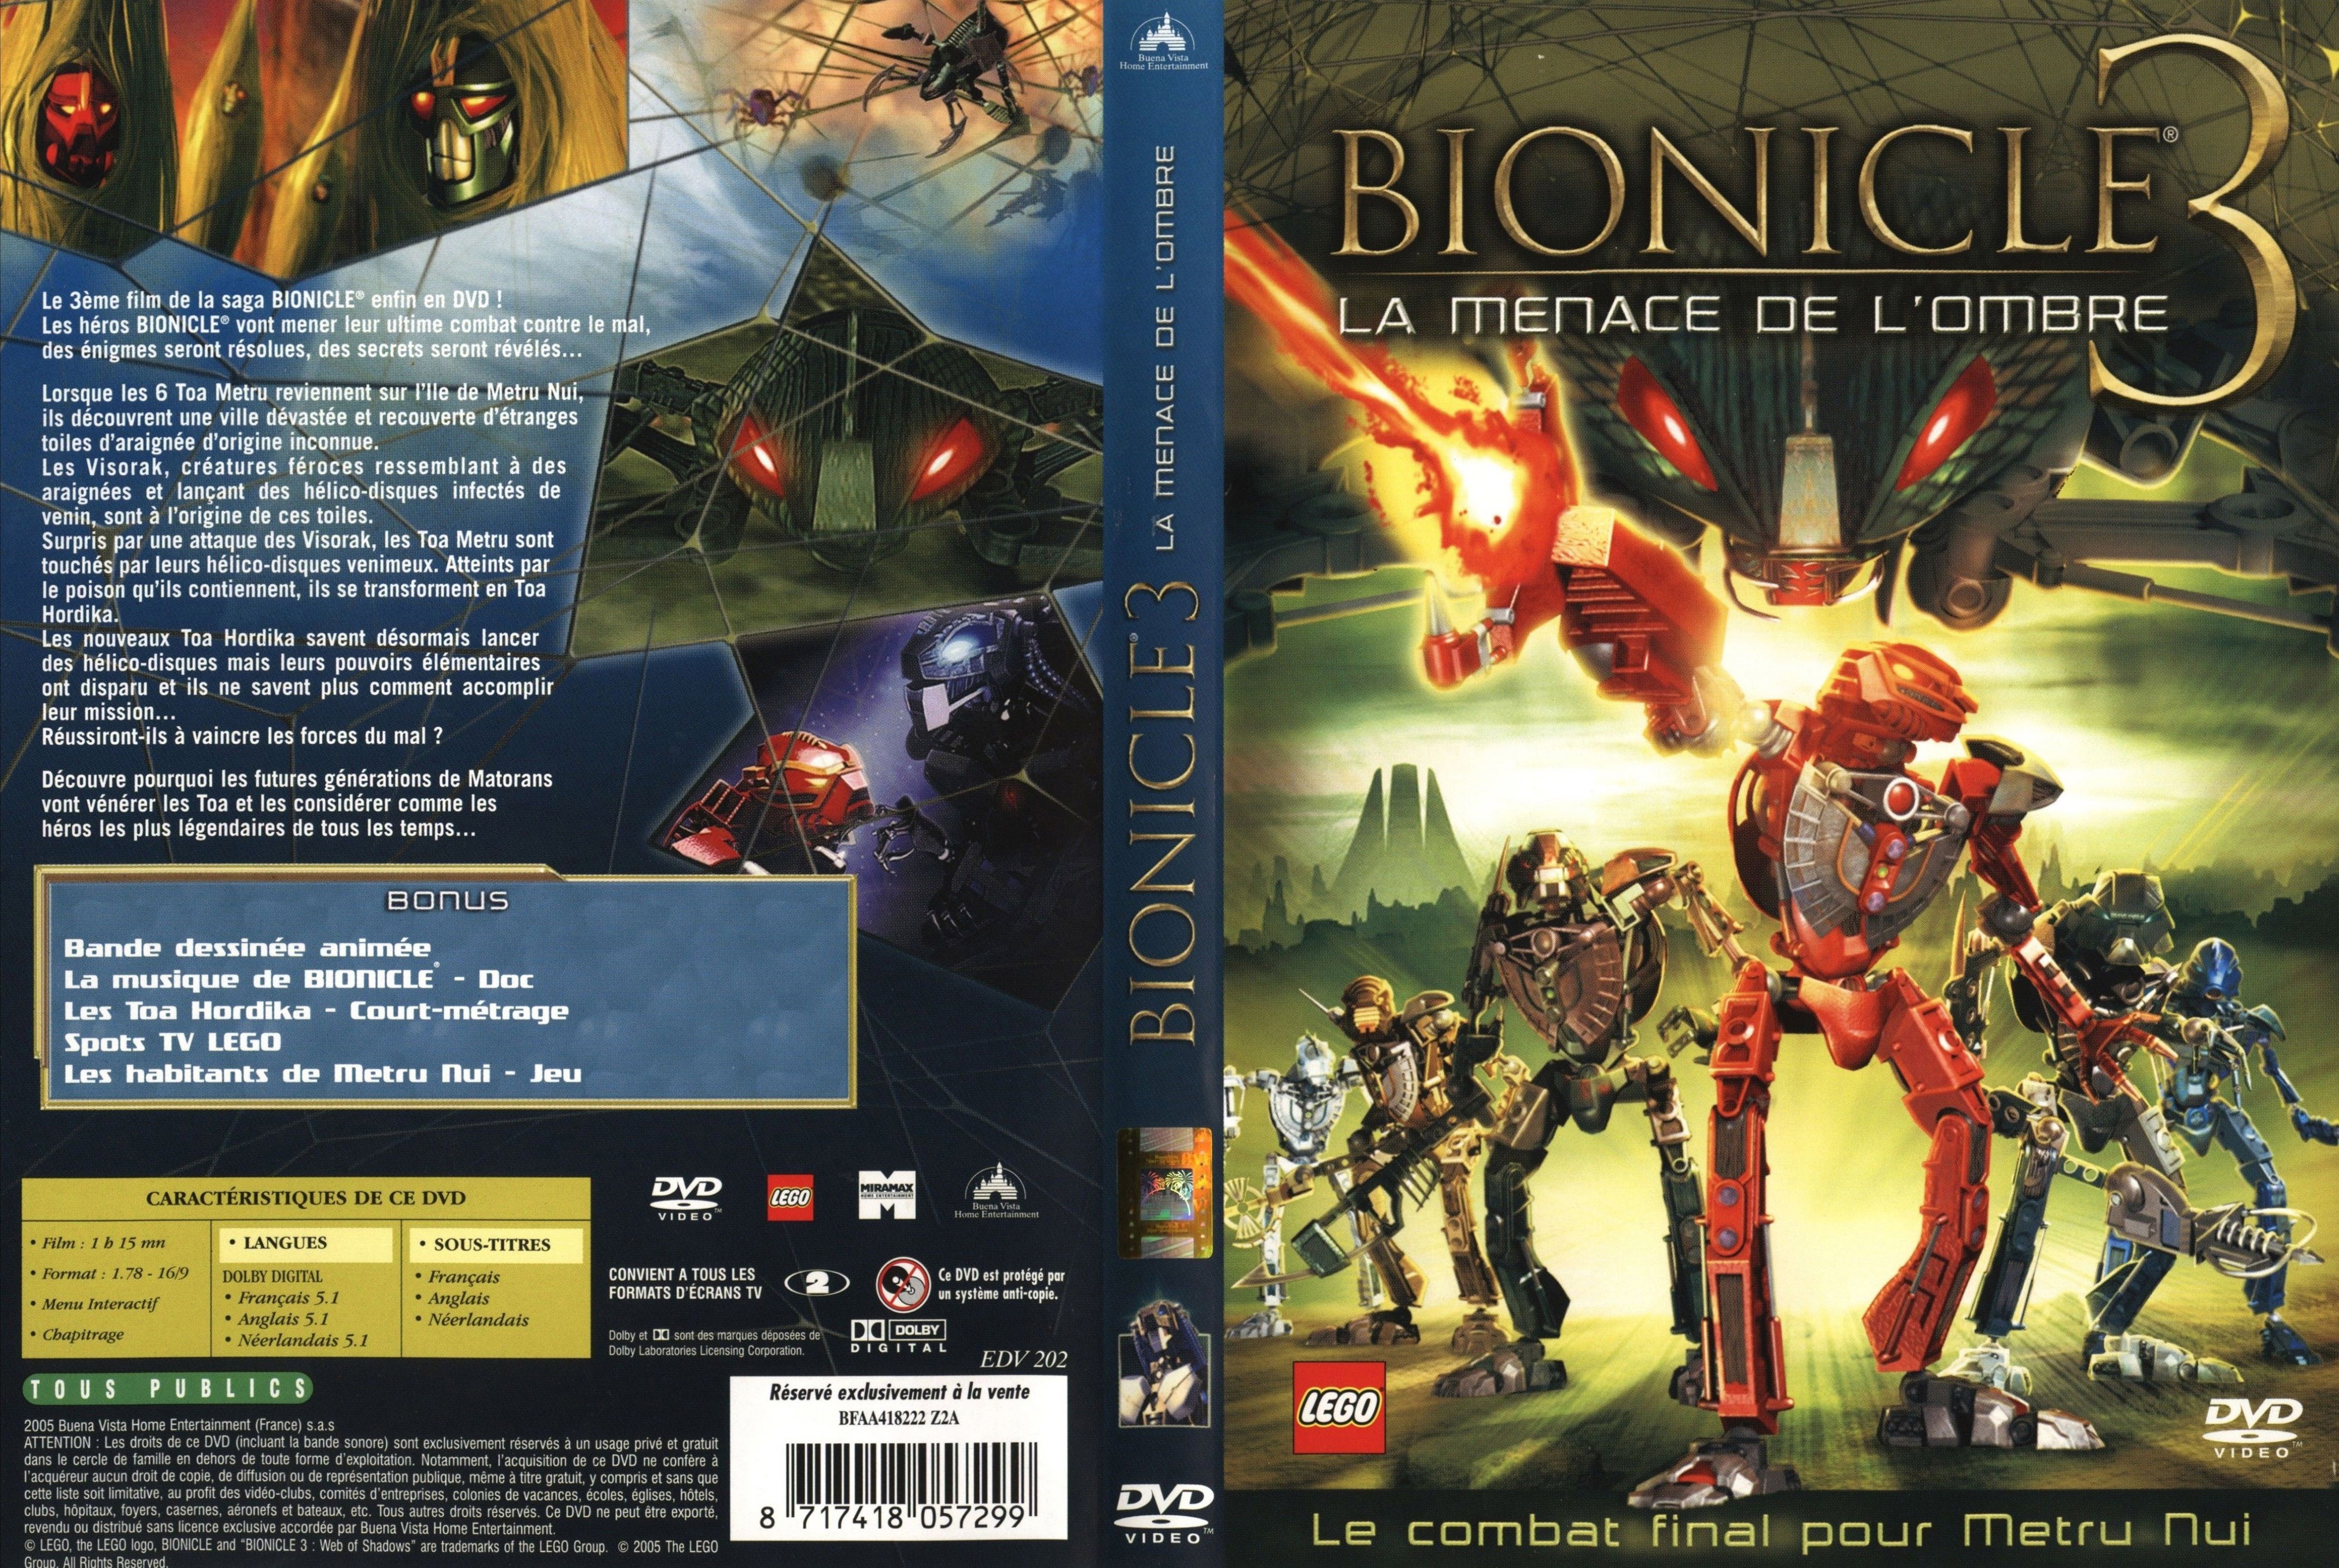 Jaquette DVD Bionicle 3